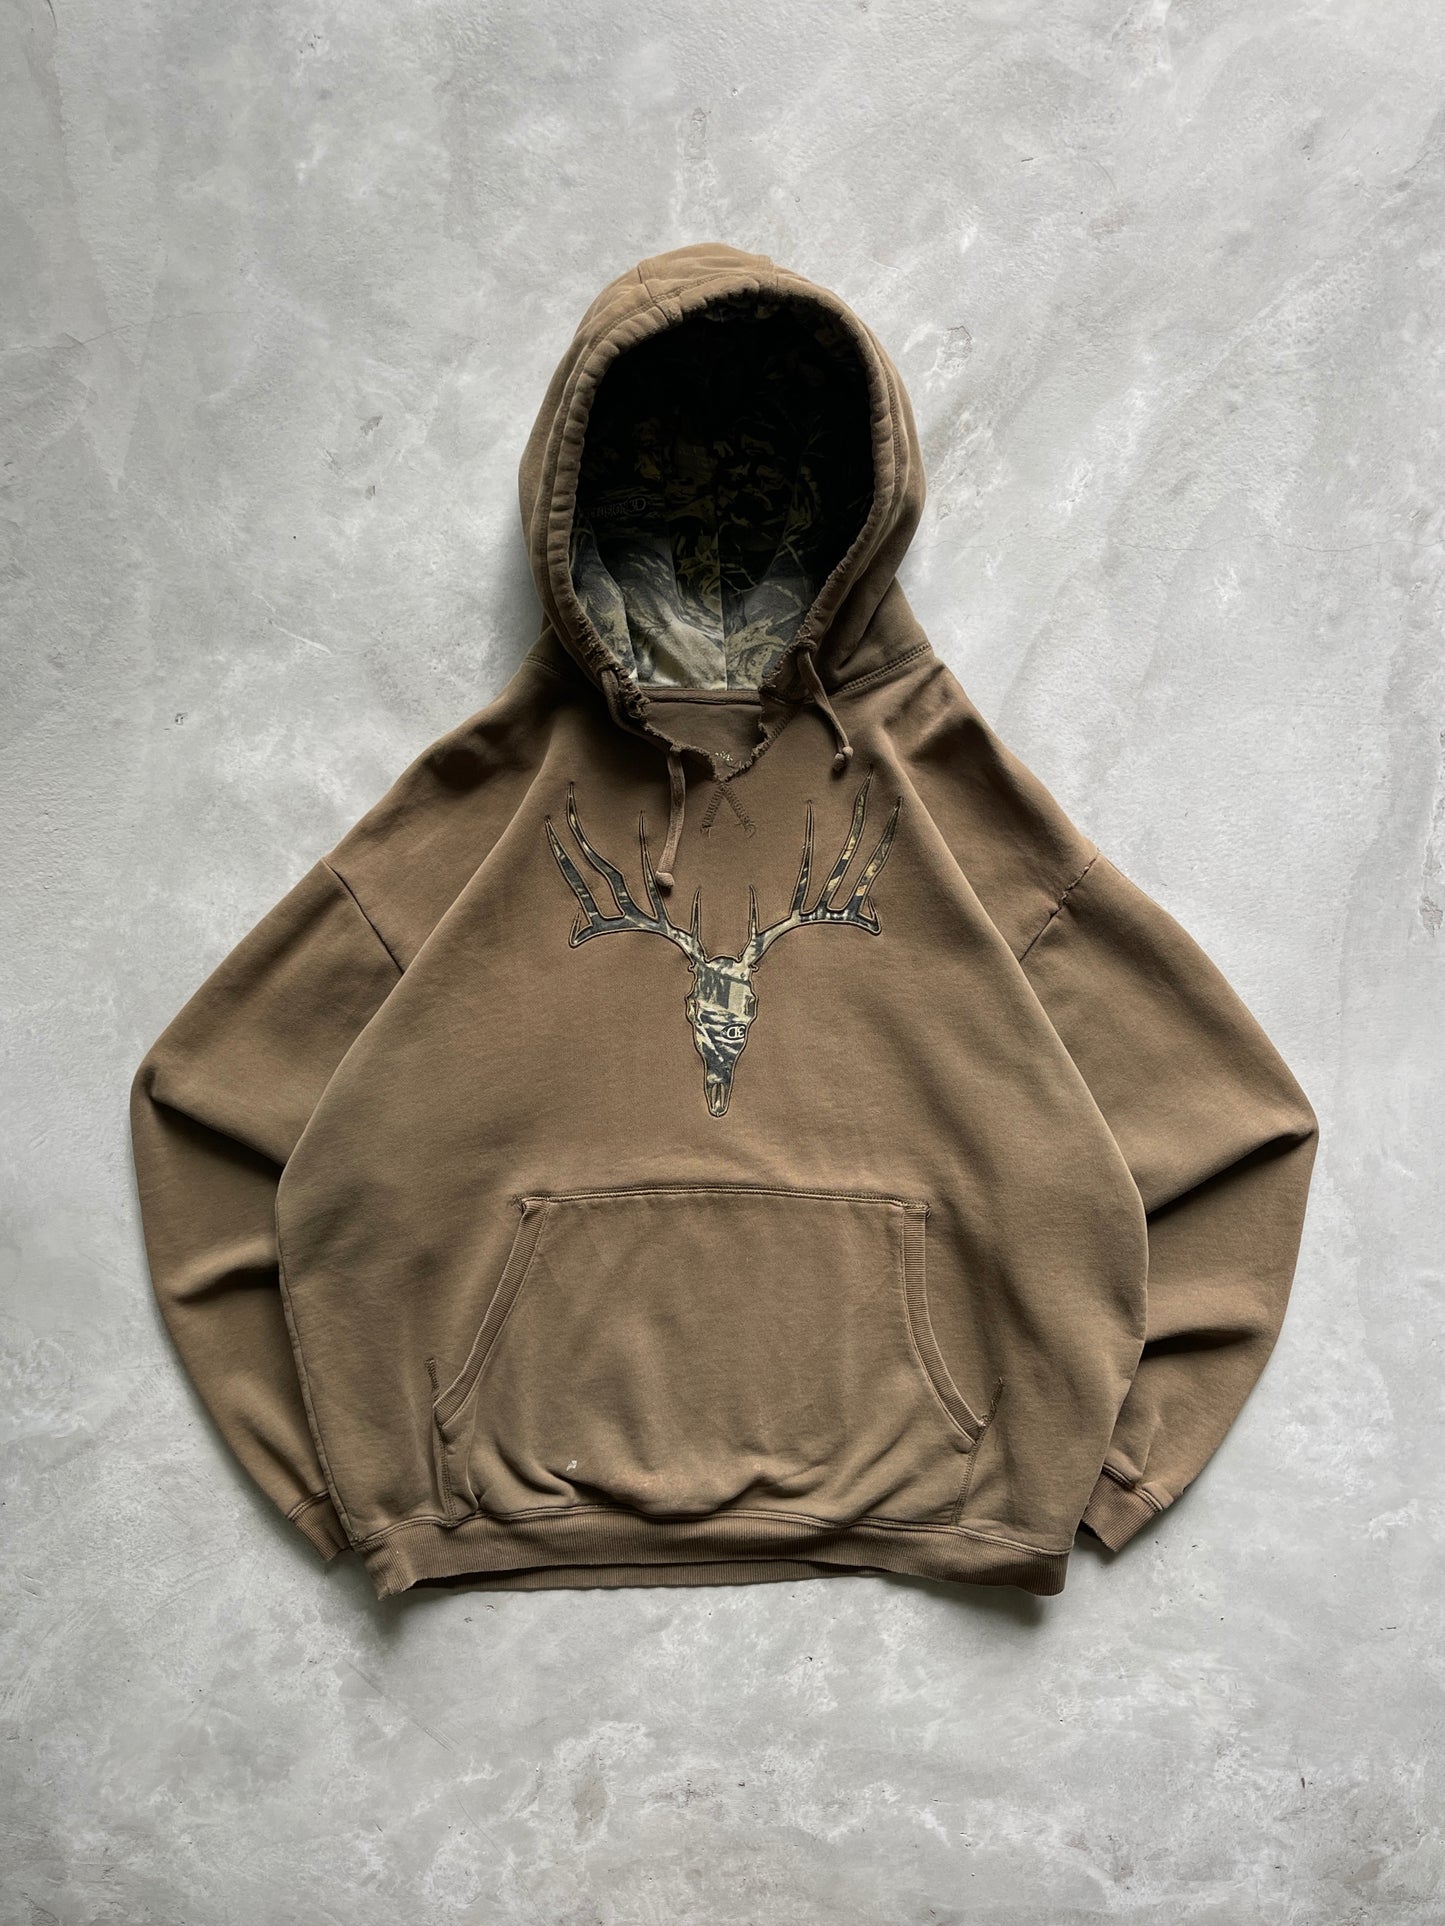 Boxy Forest Camouflage Hoodie - 2000s - XL